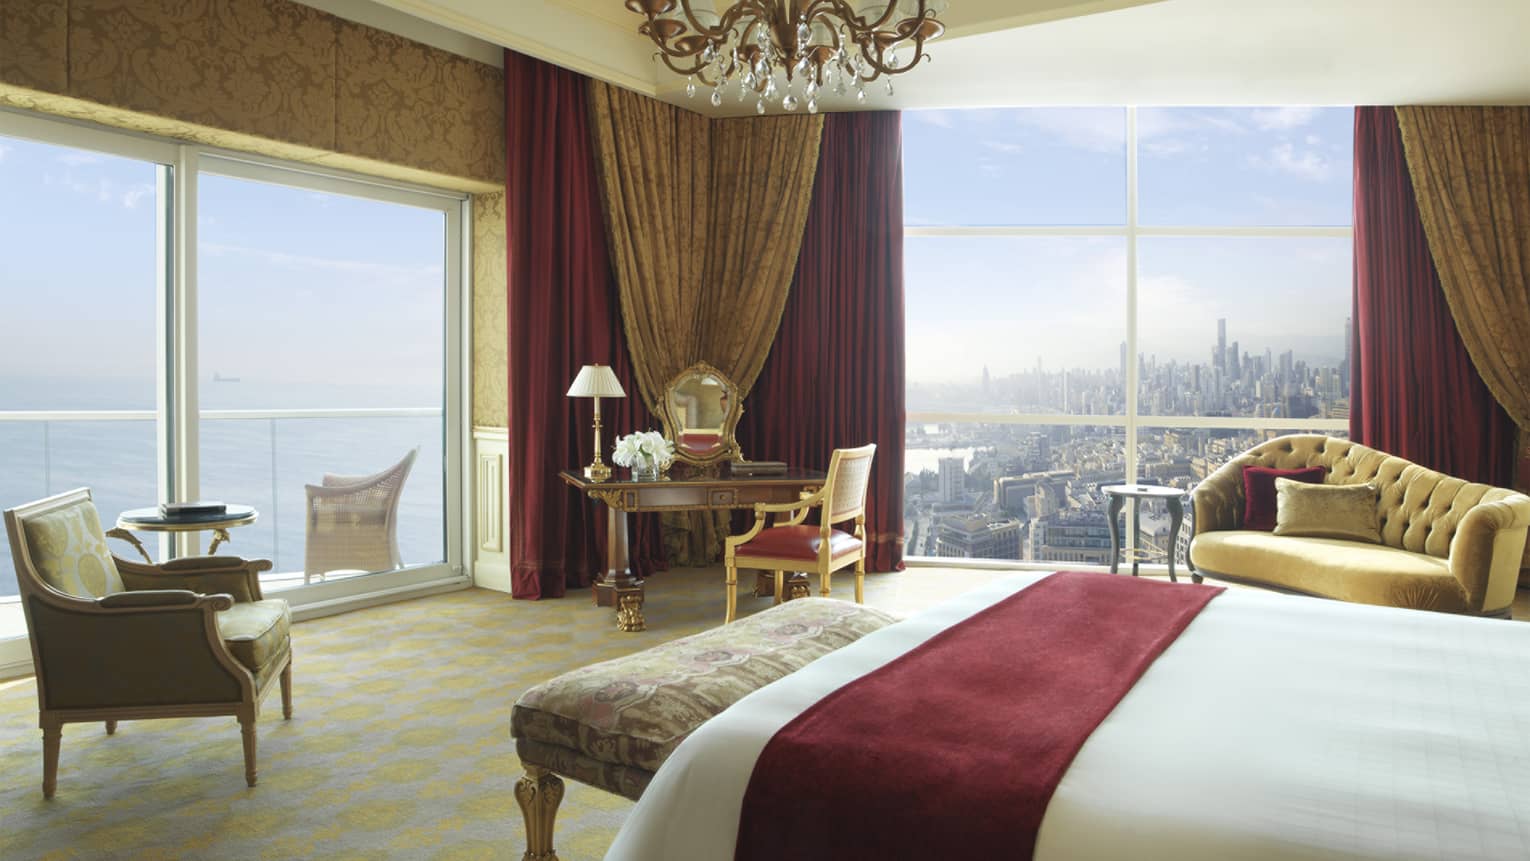 White bed with red suede sash, antique-style bench, green-and-gold leaf armchair, corner suite views of water and city